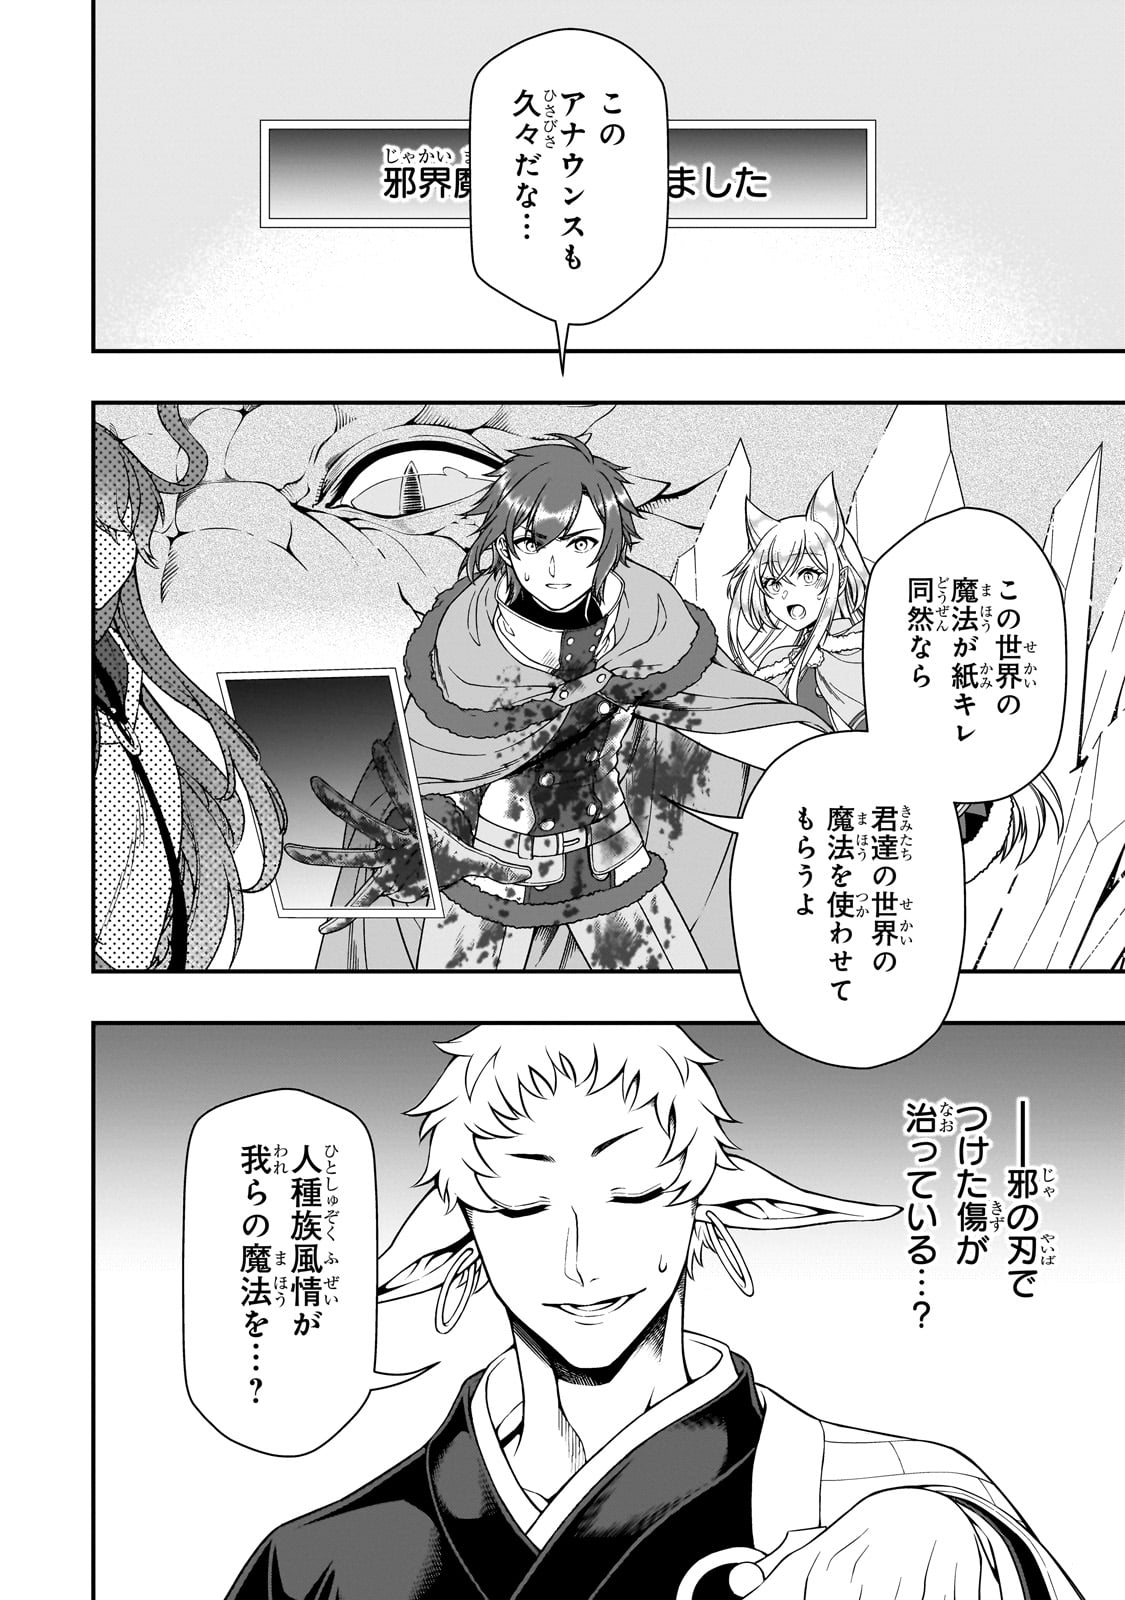 Ex-Hero Candidates, Who Turned Out To Be A Cheat From Lv2, Laid-back Life In Another World - Chapter 50 - Page 2